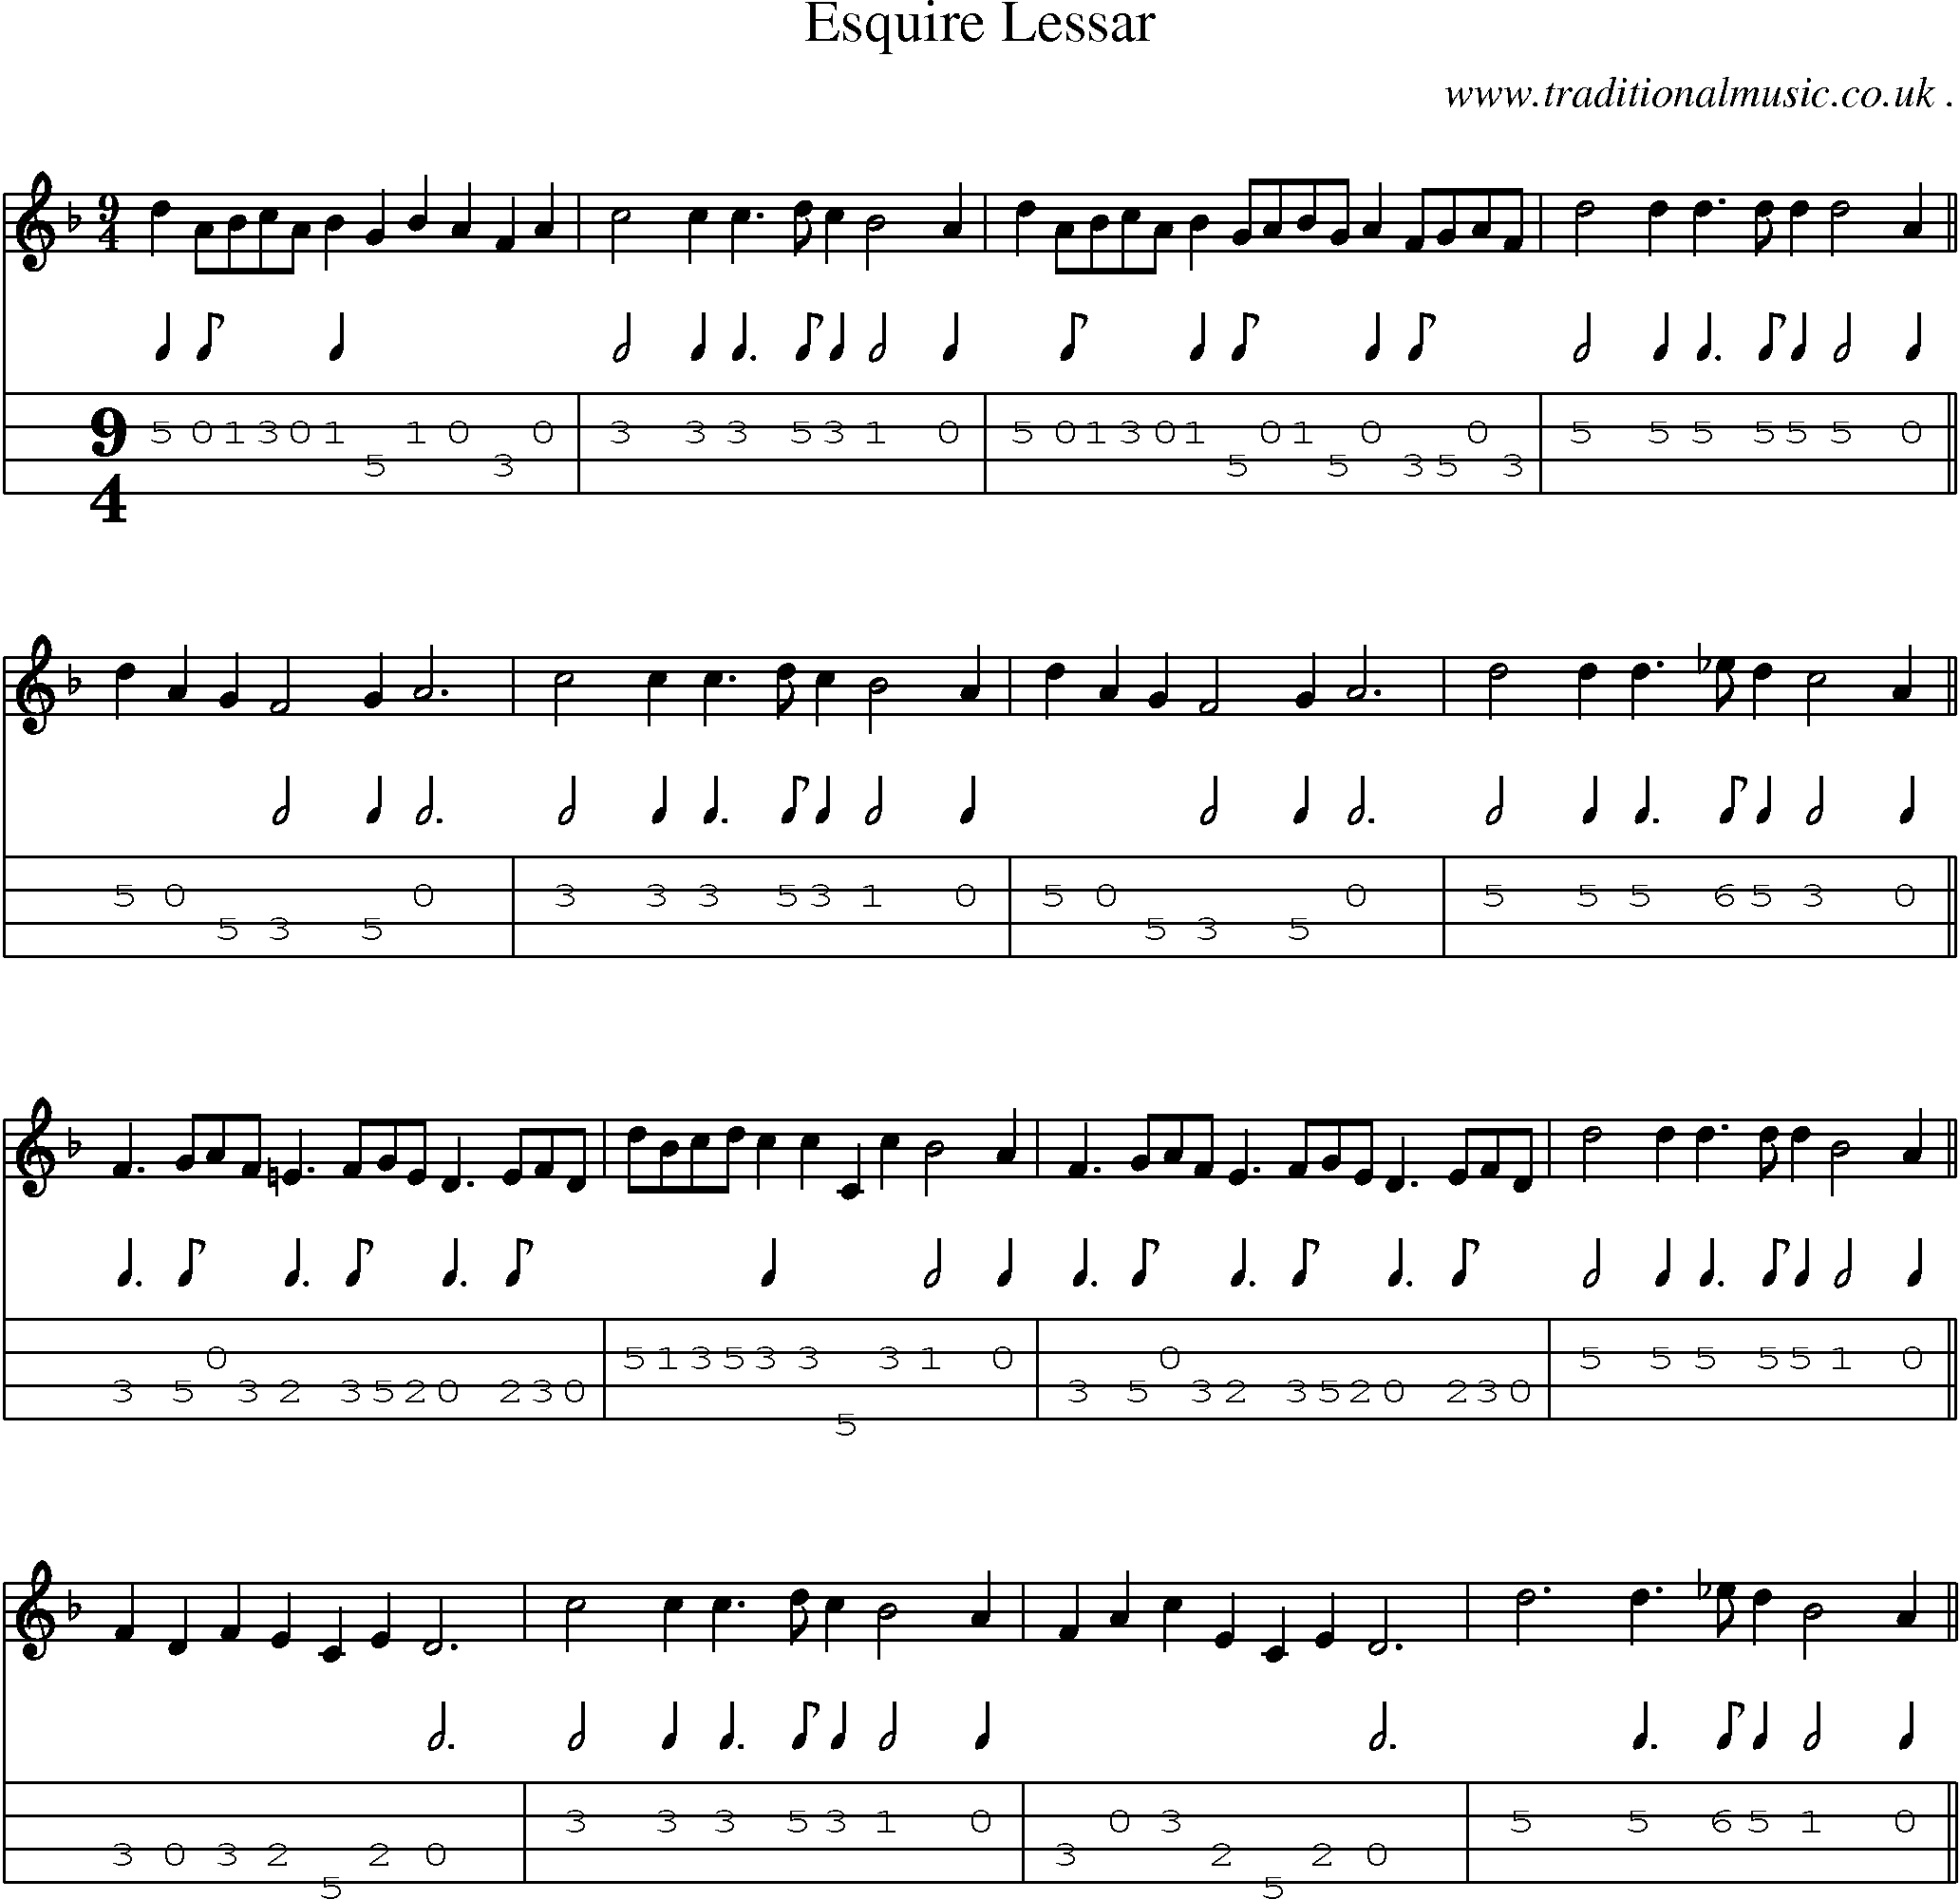 Sheet-Music and Mandolin Tabs for Esquire Lessar